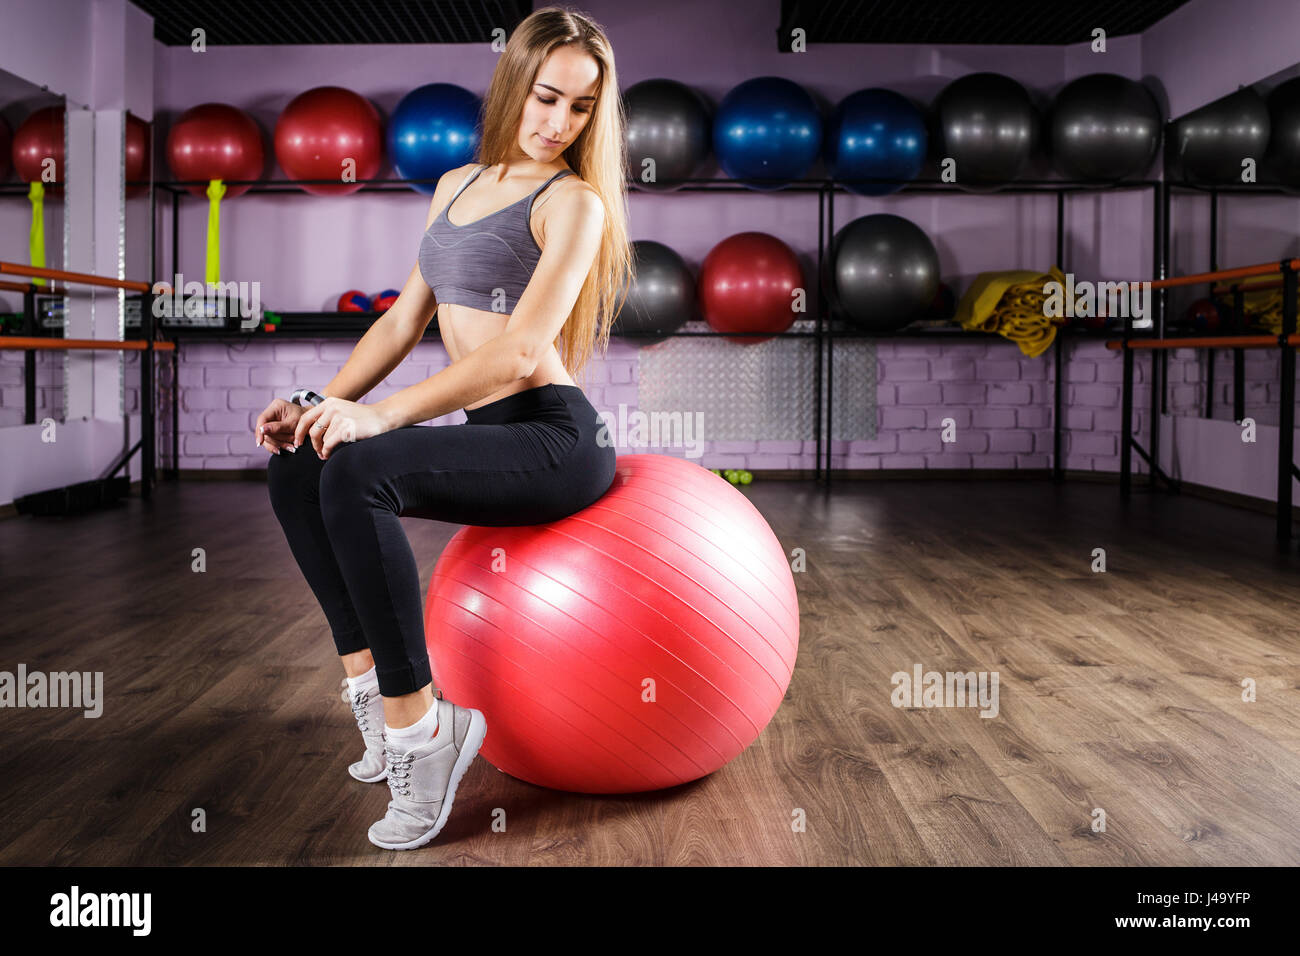 Young Beautiful Fitness Girl Sitting On Fitness Ball In Health Club Blonde Sporty Woman In The 